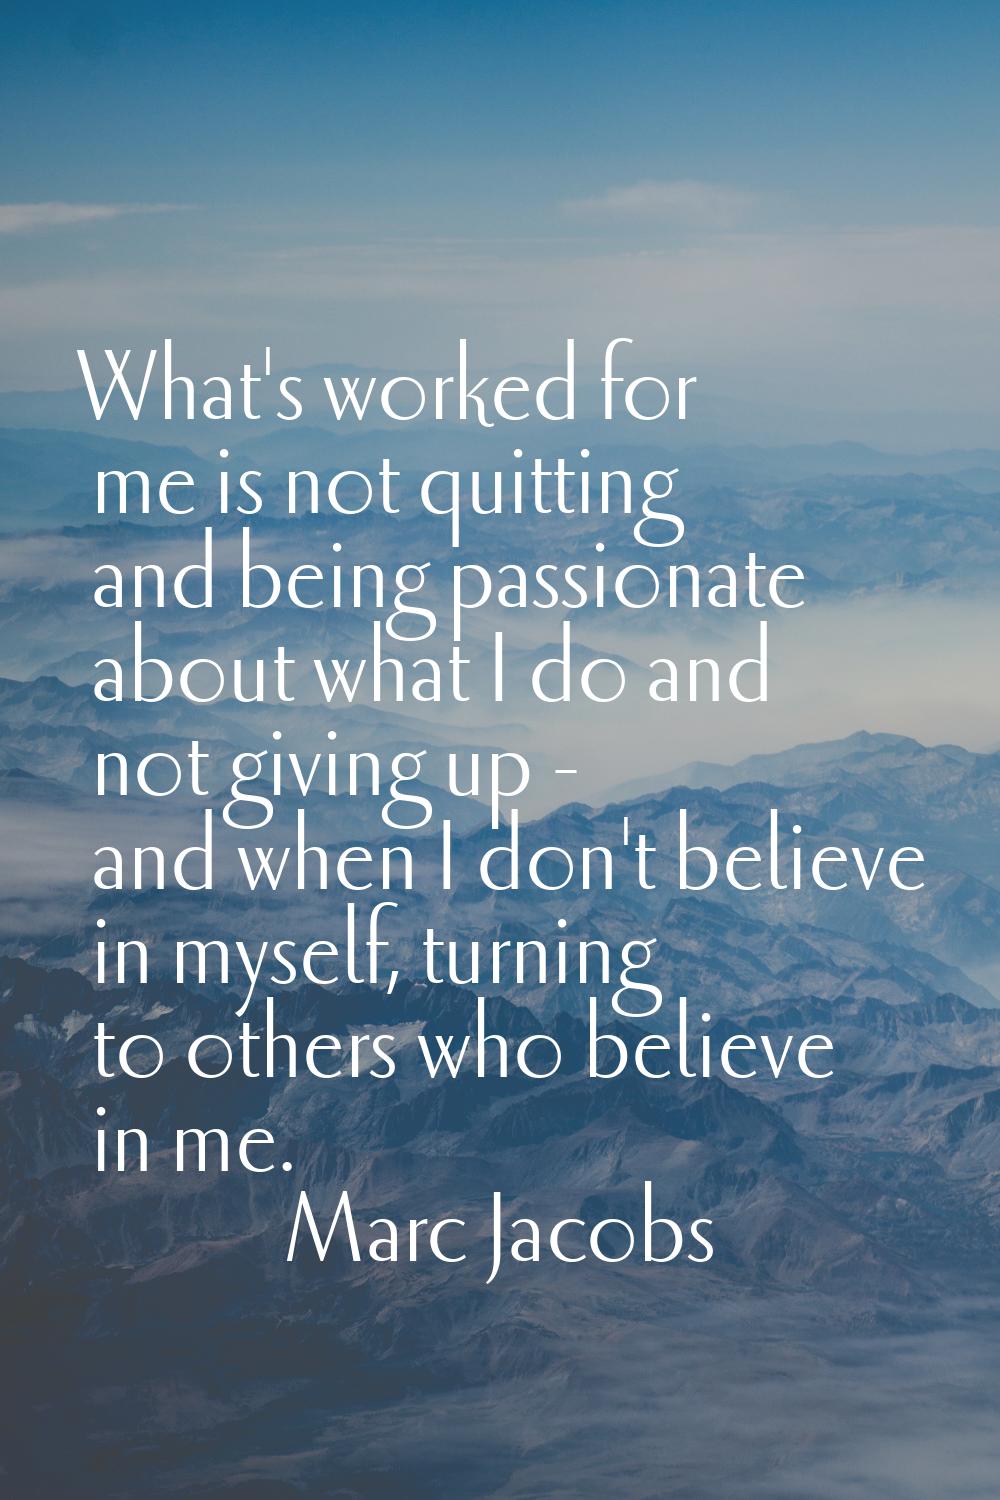 What's worked for me is not quitting and being passionate about what I do and not giving up - and w